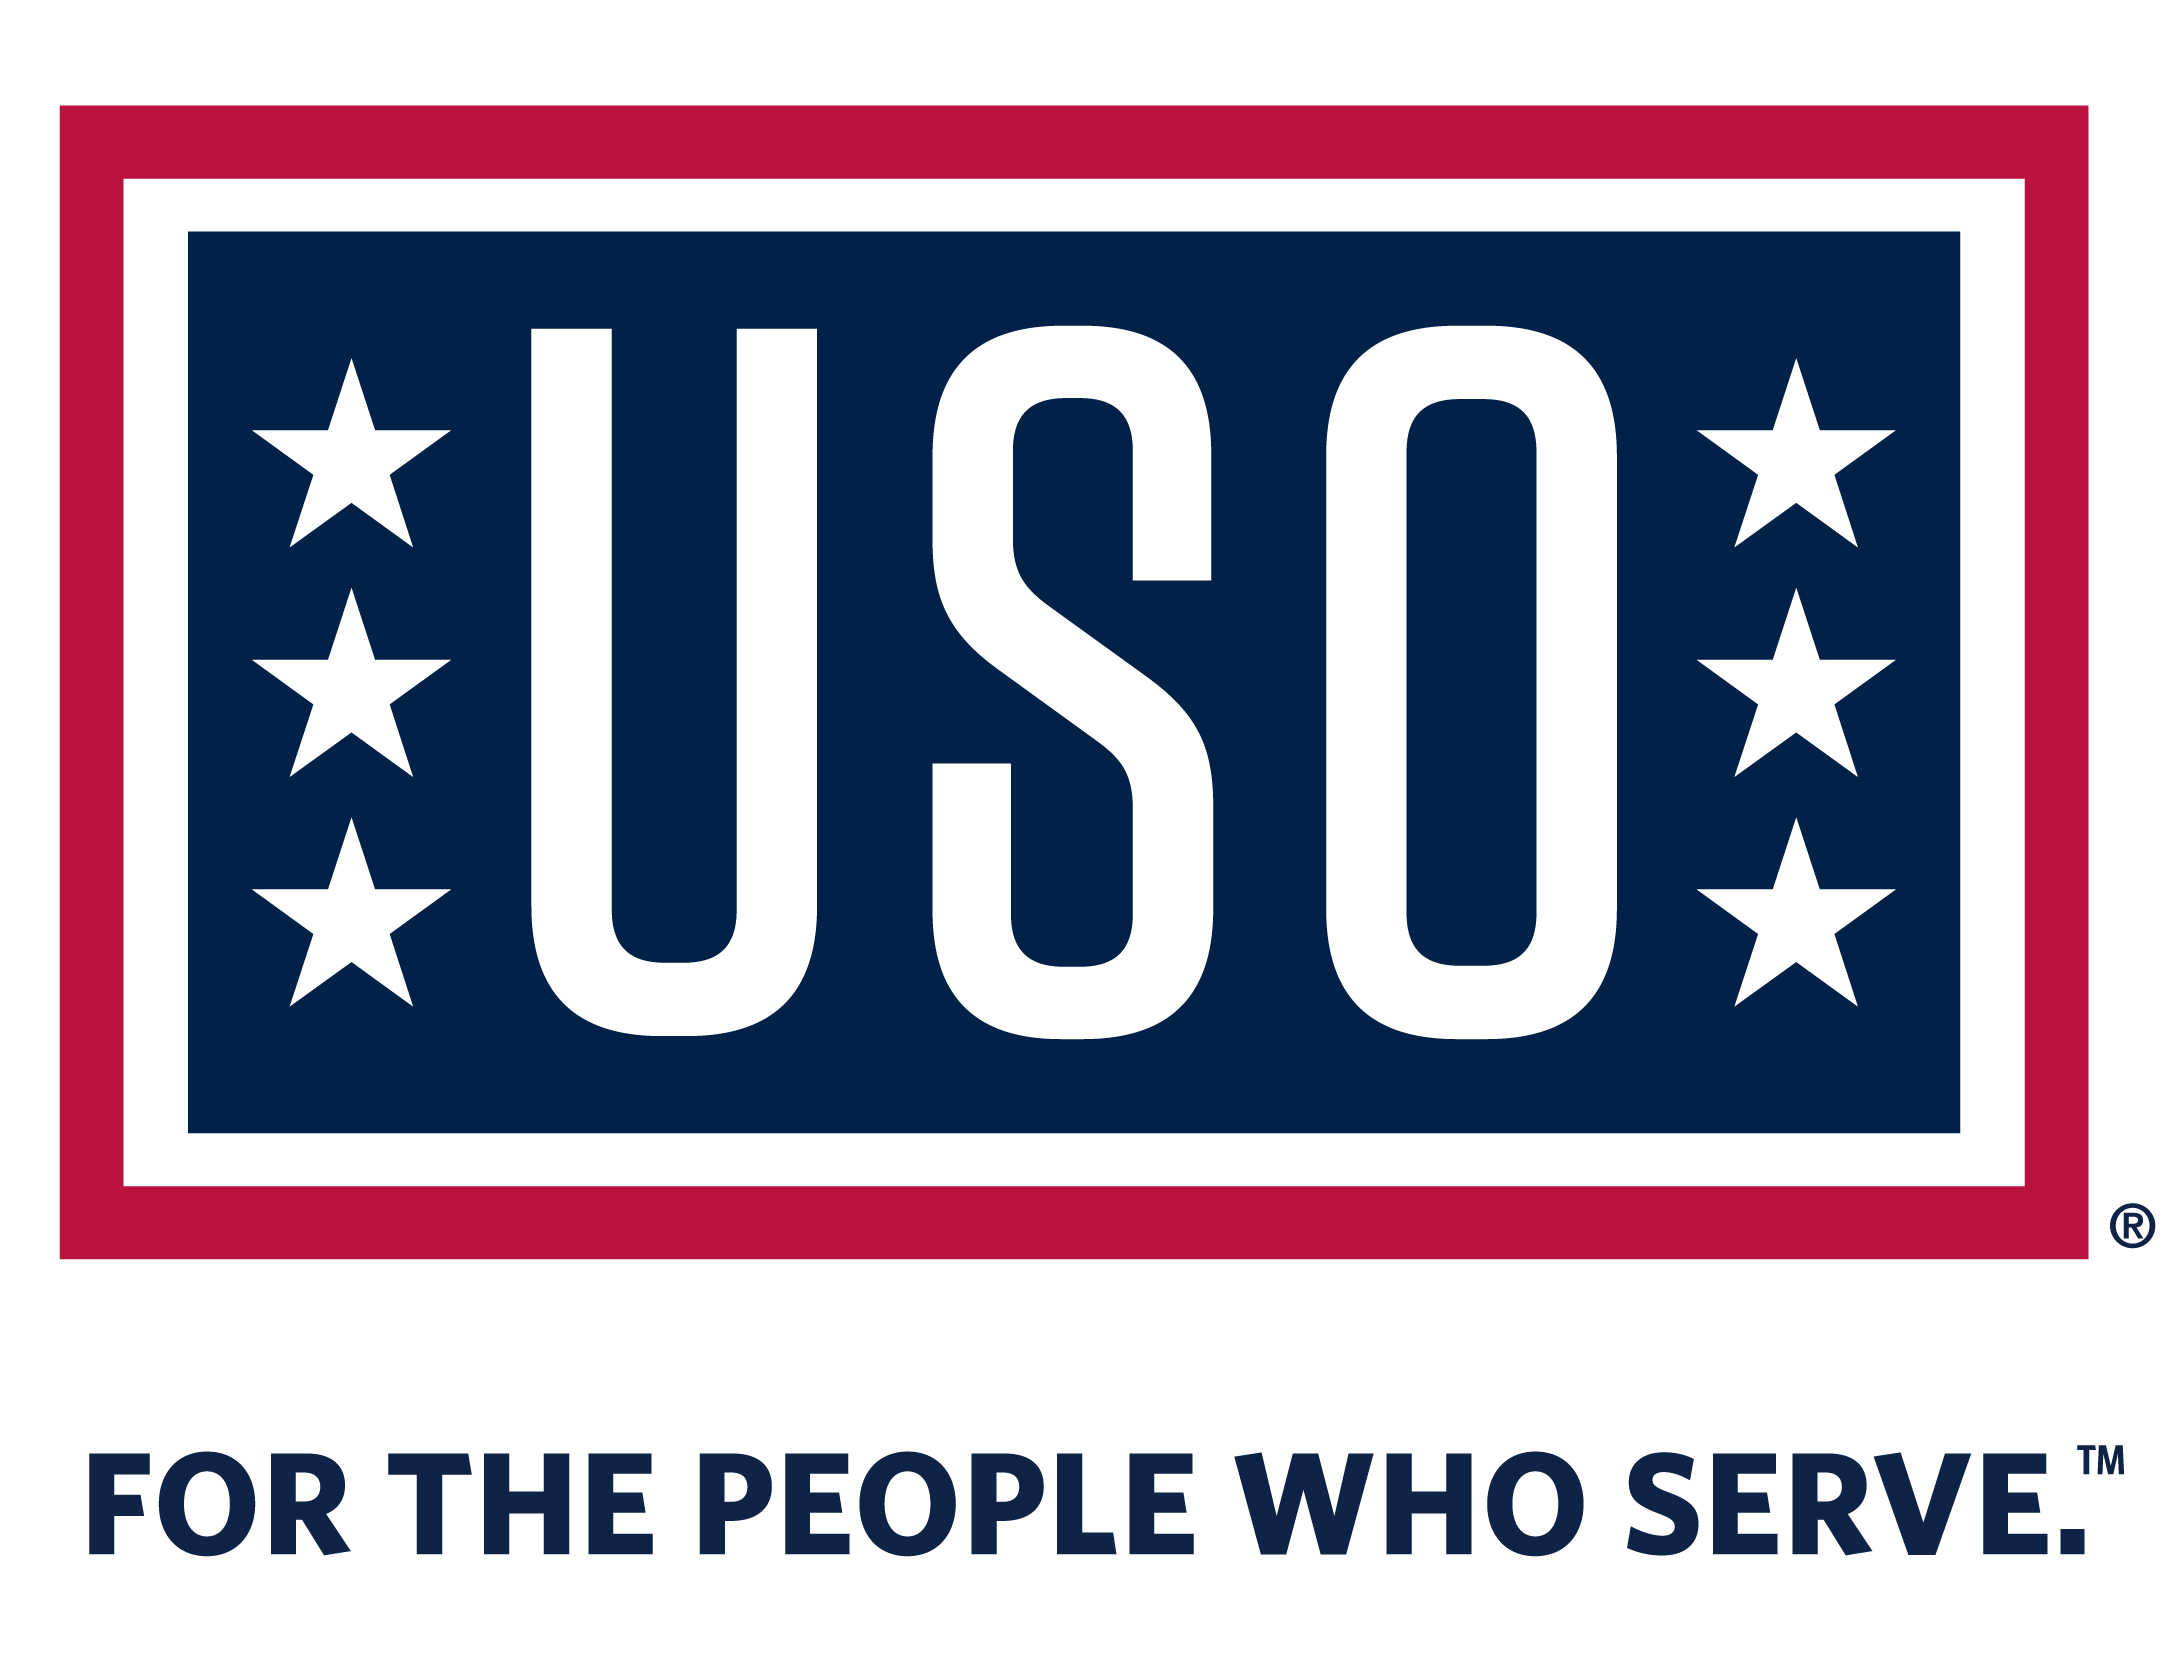 USO: for the people who serve